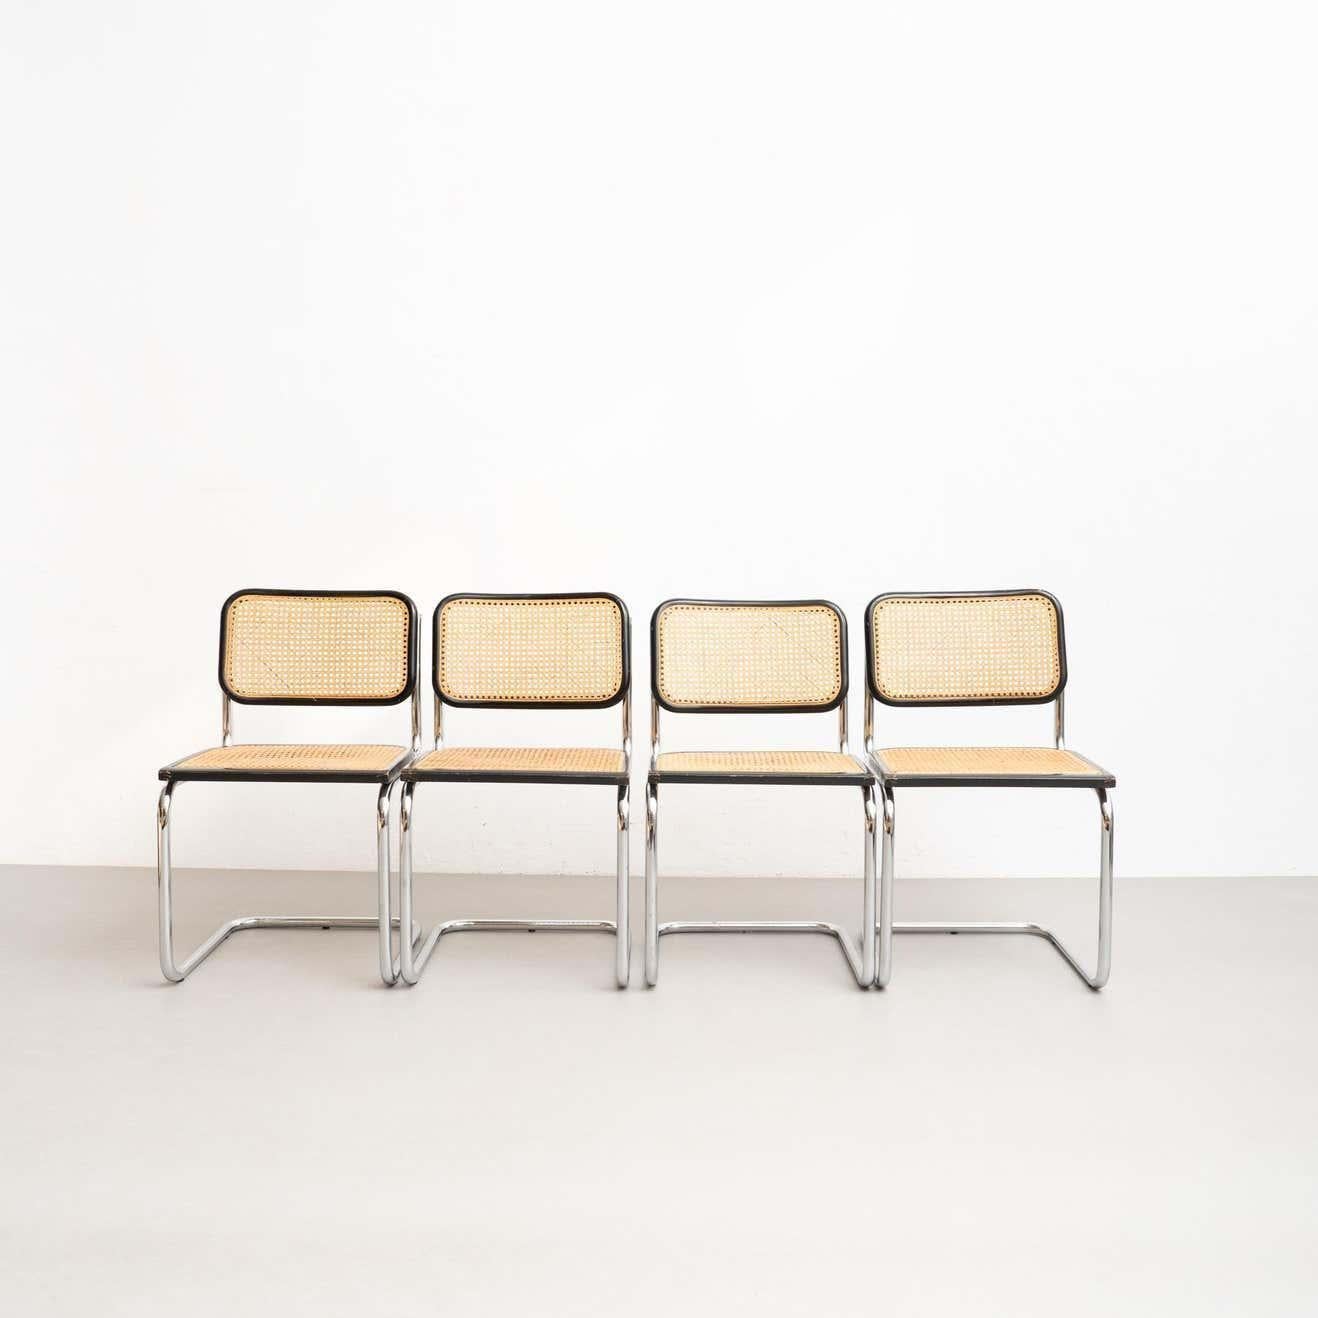 Set of 4 Cesca chairs, designed by Marcel Breuer.

Manufactured in Italy, circa 1960 by Unknown Manufacturer

Metal pipe frame, wood seat and back structure and rattan.

In good original condition, with minor wear consistent with age and use,